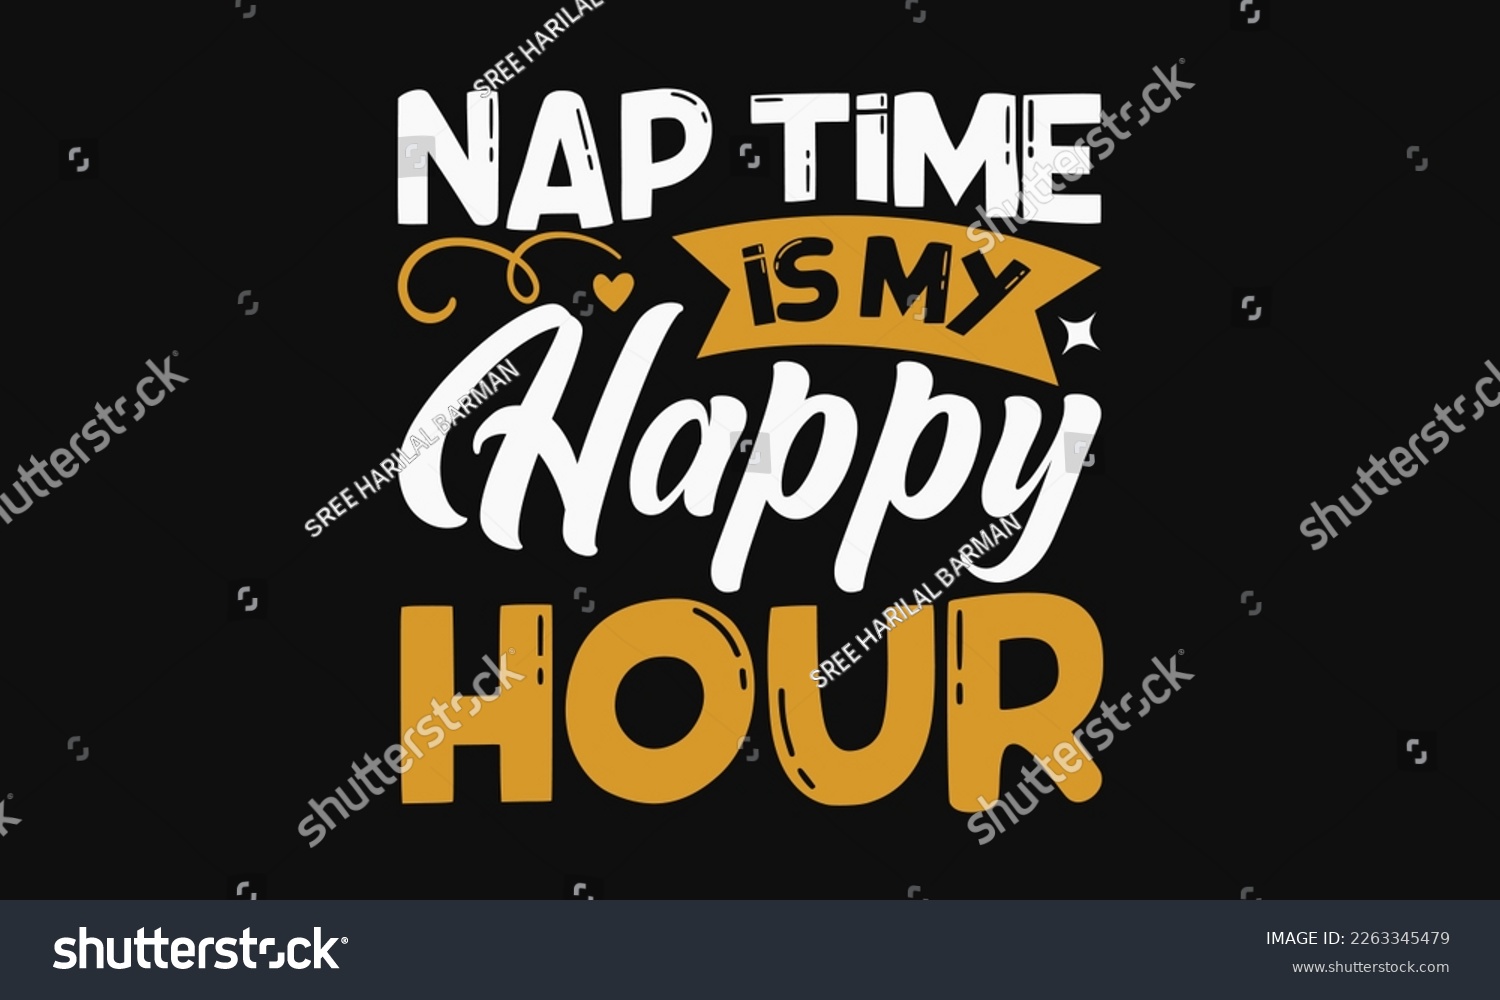 SVG of Nap time is my happy hour - Mother's day svg t-shirt design. celebration in calligraphy text or font means March 21 Mother's Day in the Middle East. greeting cards, mugs, brochures, posters, labels. svg